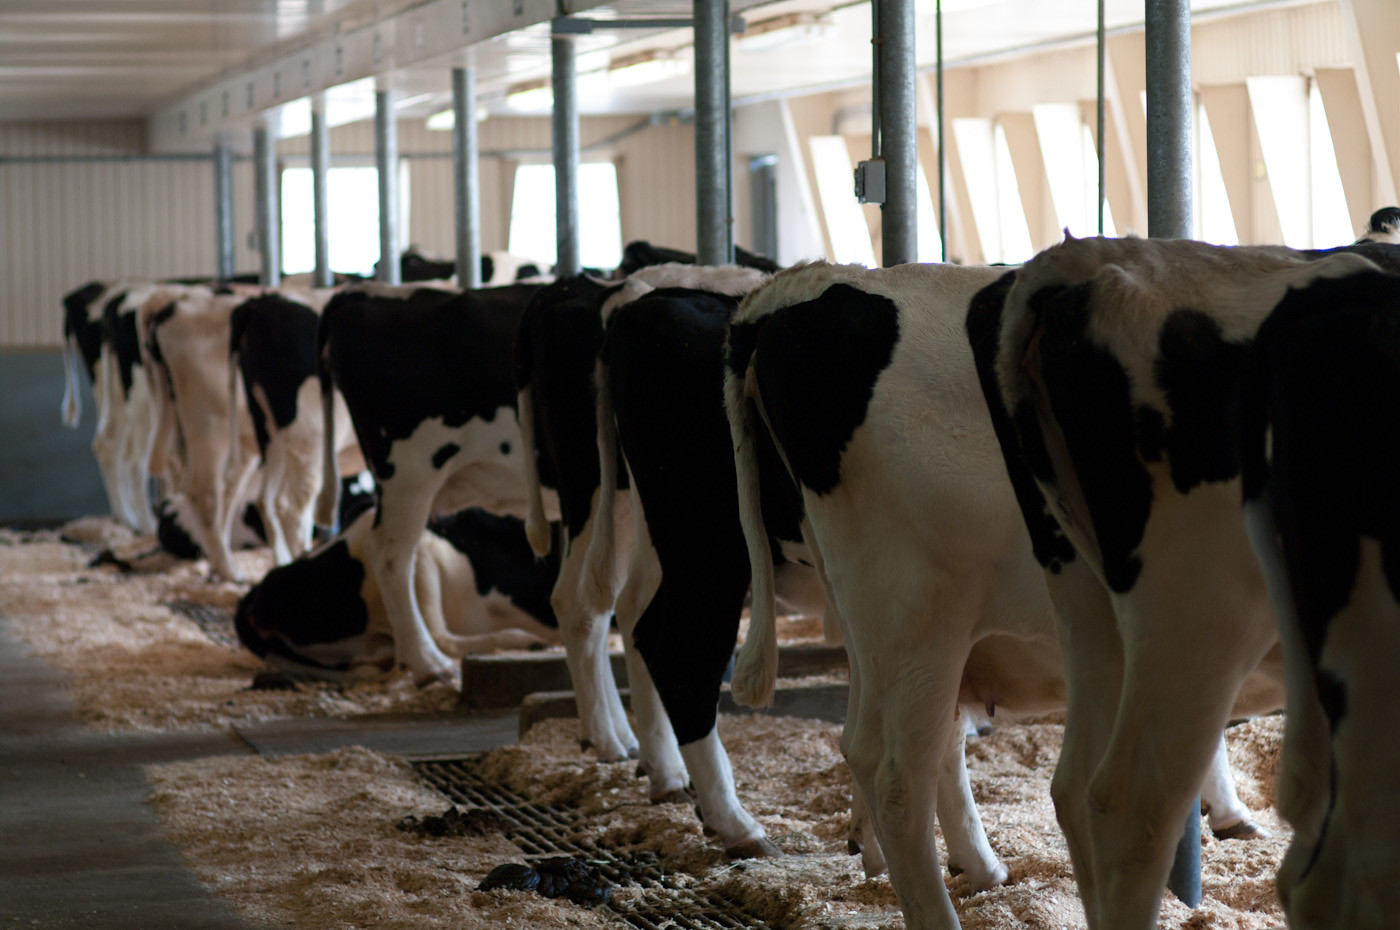 A group of cows standing in the stable stock.